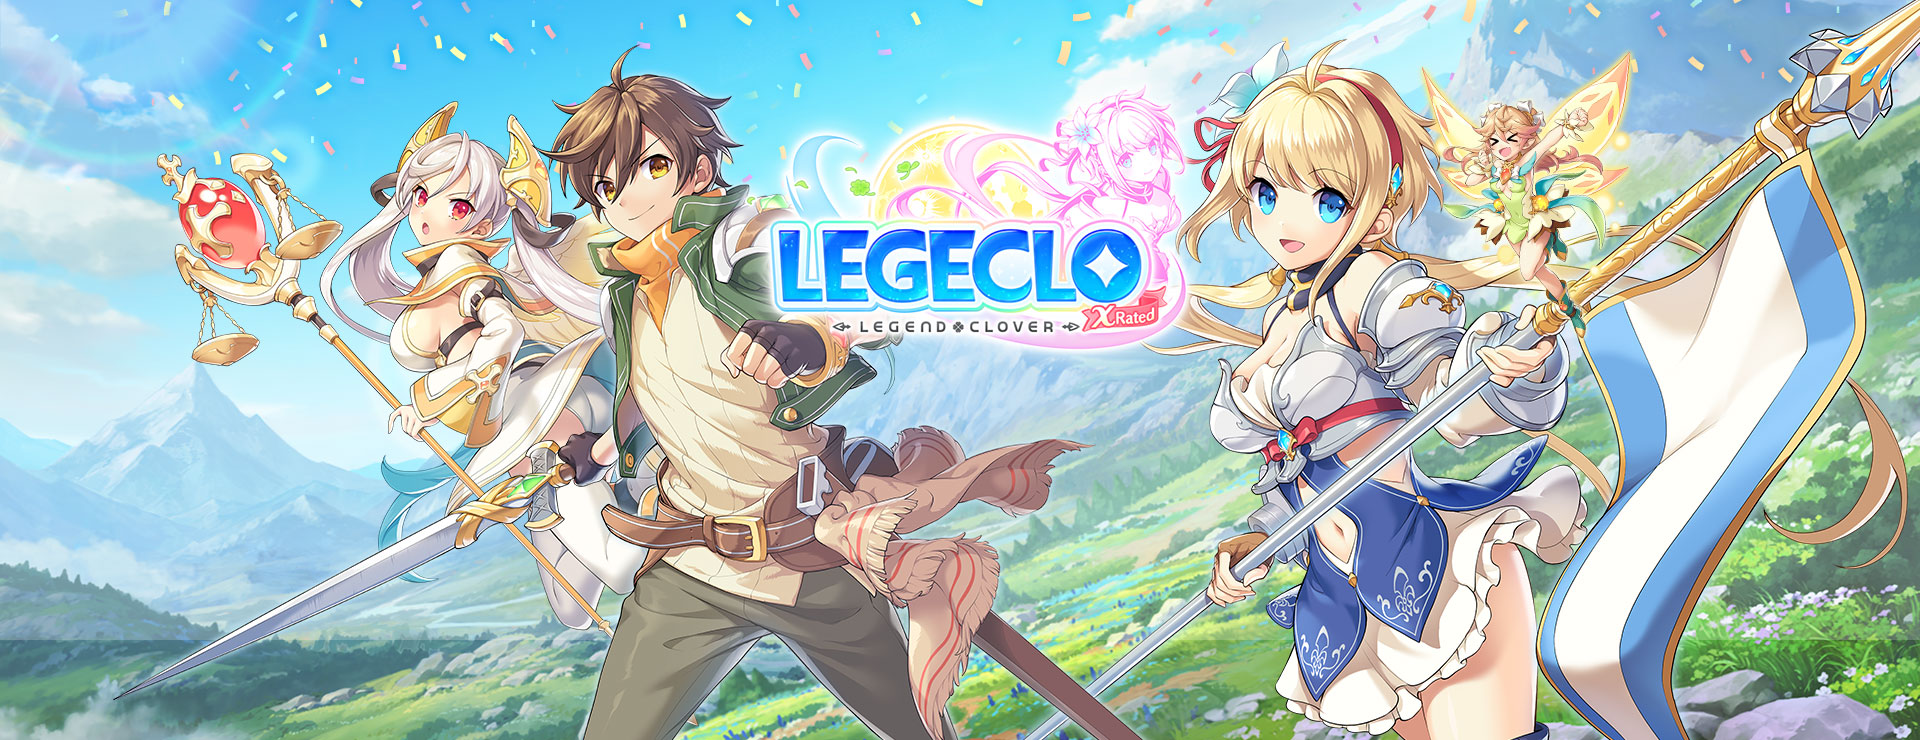 Legeclo: Legend Clover X Rated - ターン制RPG ゲーム